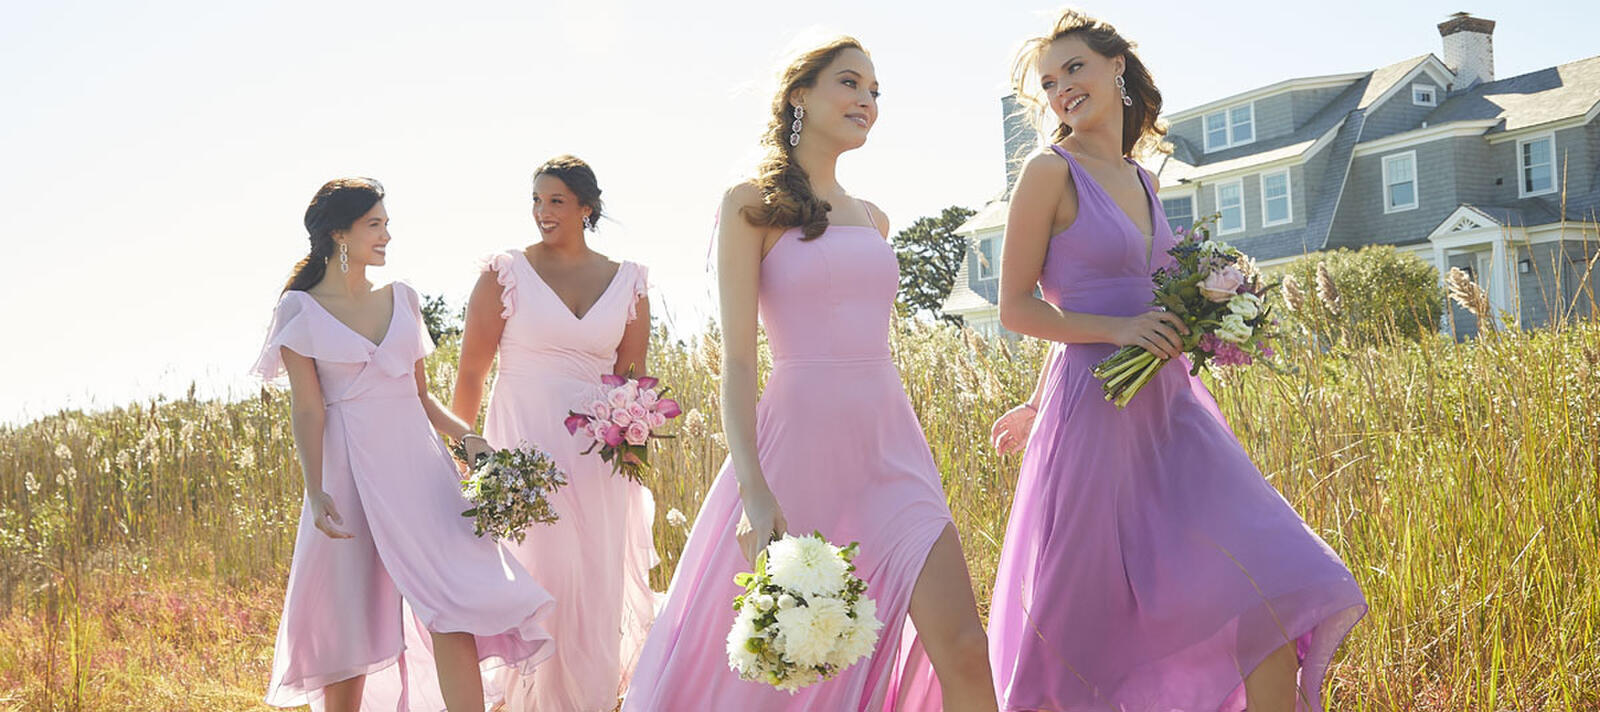 The Largest Selection of Bridesmaids Dresses in Asheville